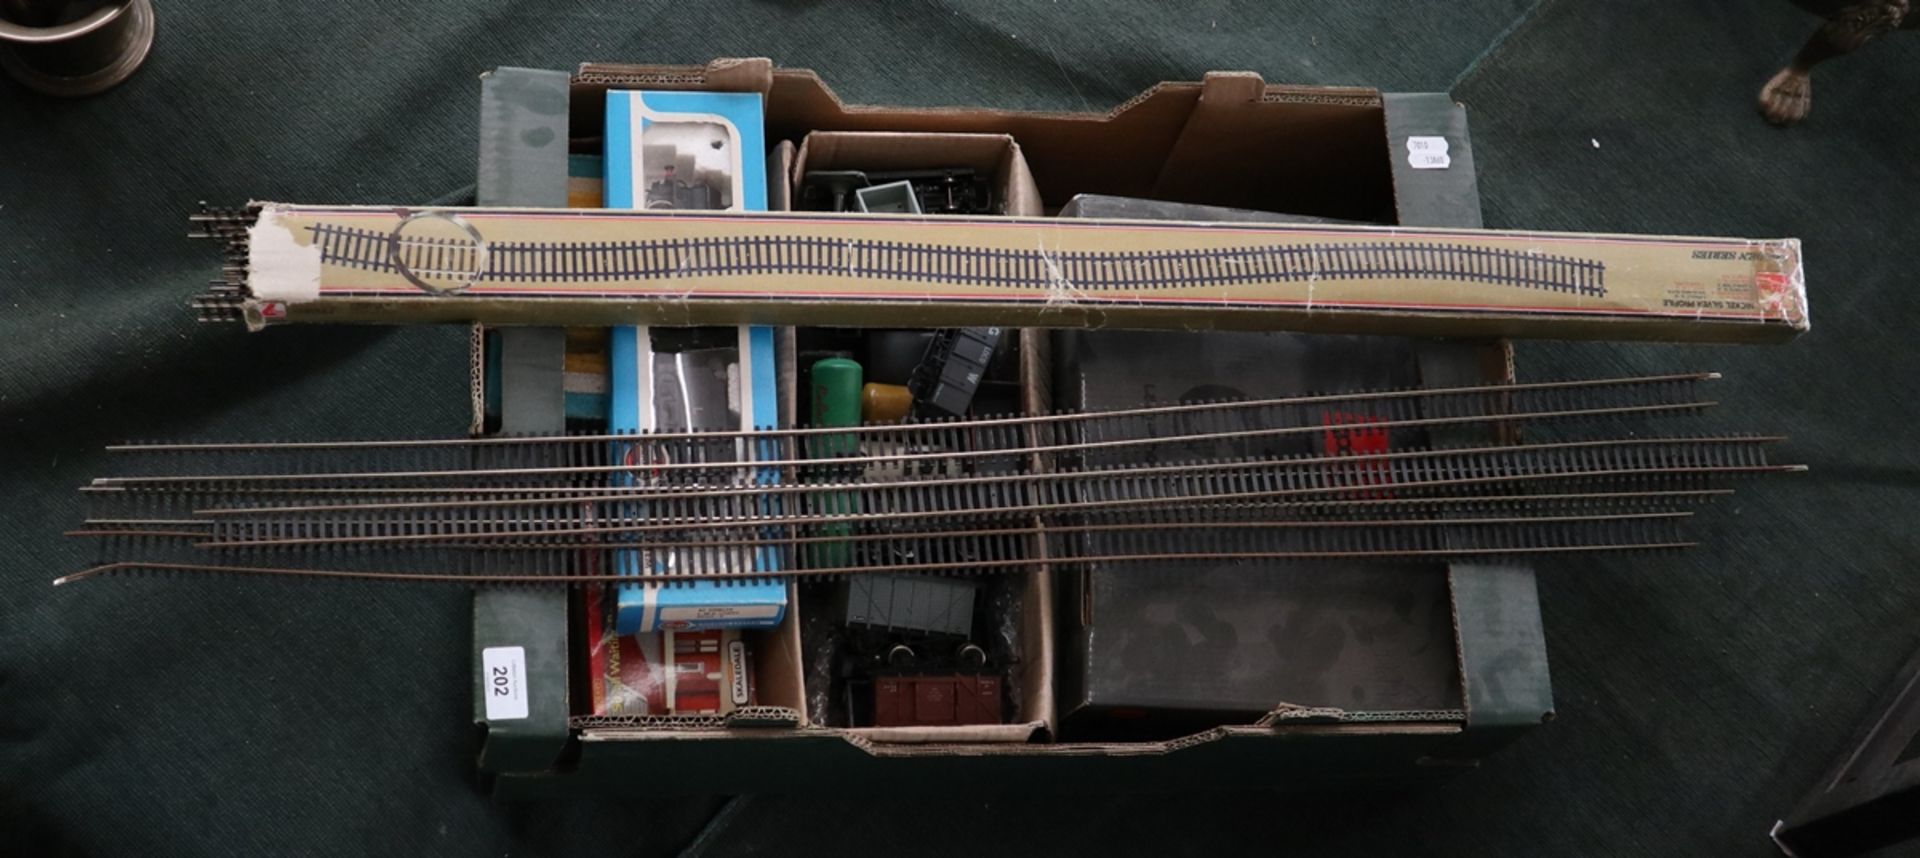 Assorted model train components including track, trains, carriages, controller etc